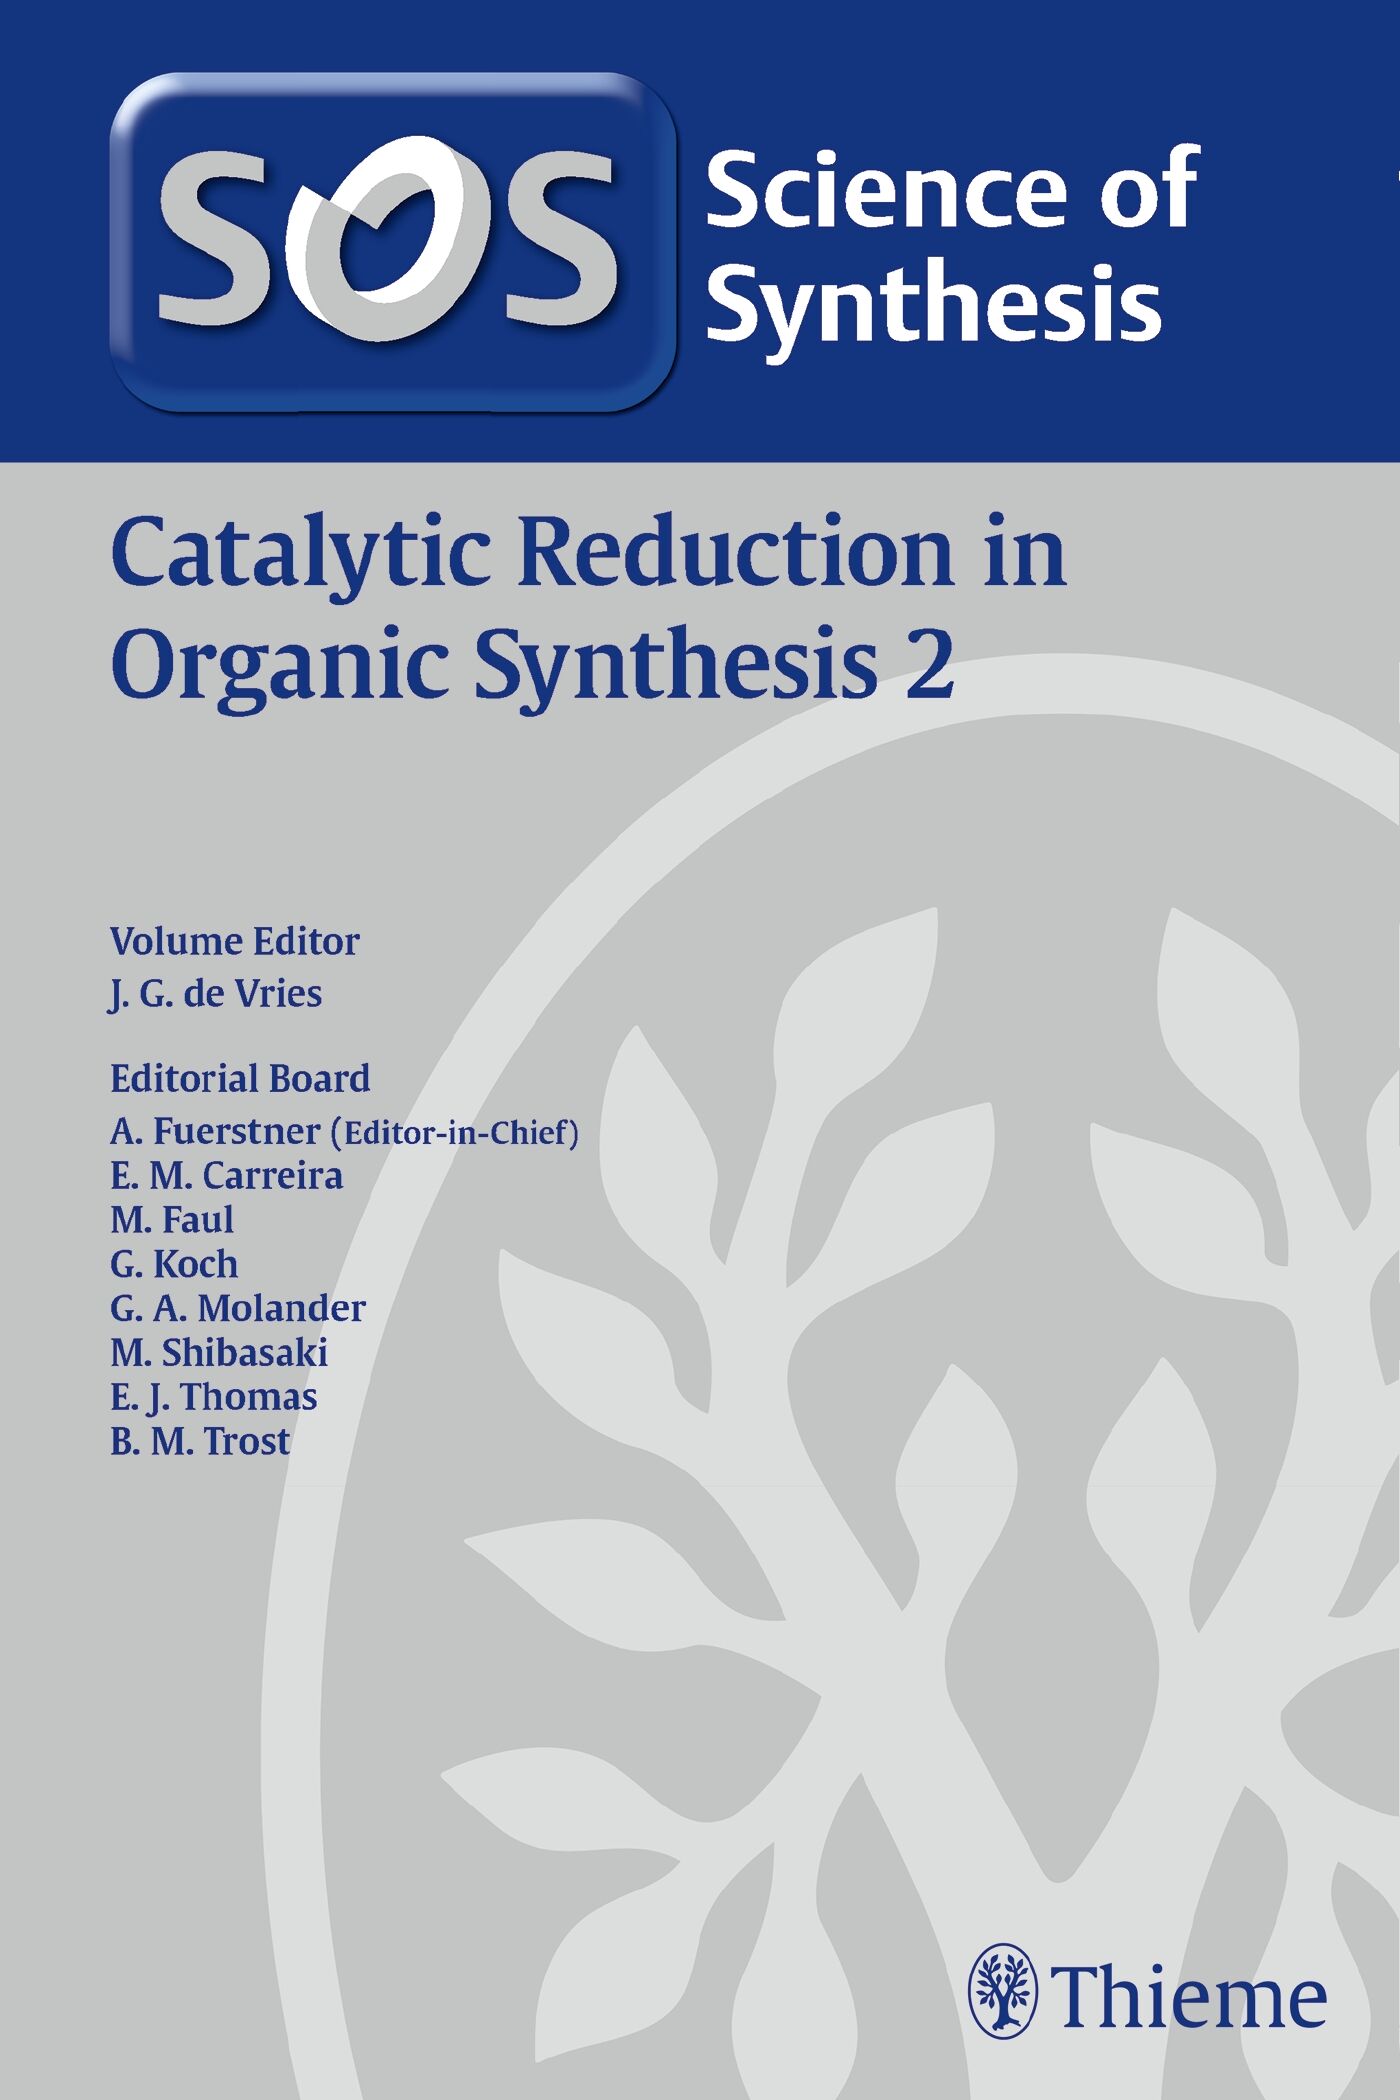 Science of Synthesis: Catalytic Reduction in Organic Synthesis Vol. 2, 9783132406261